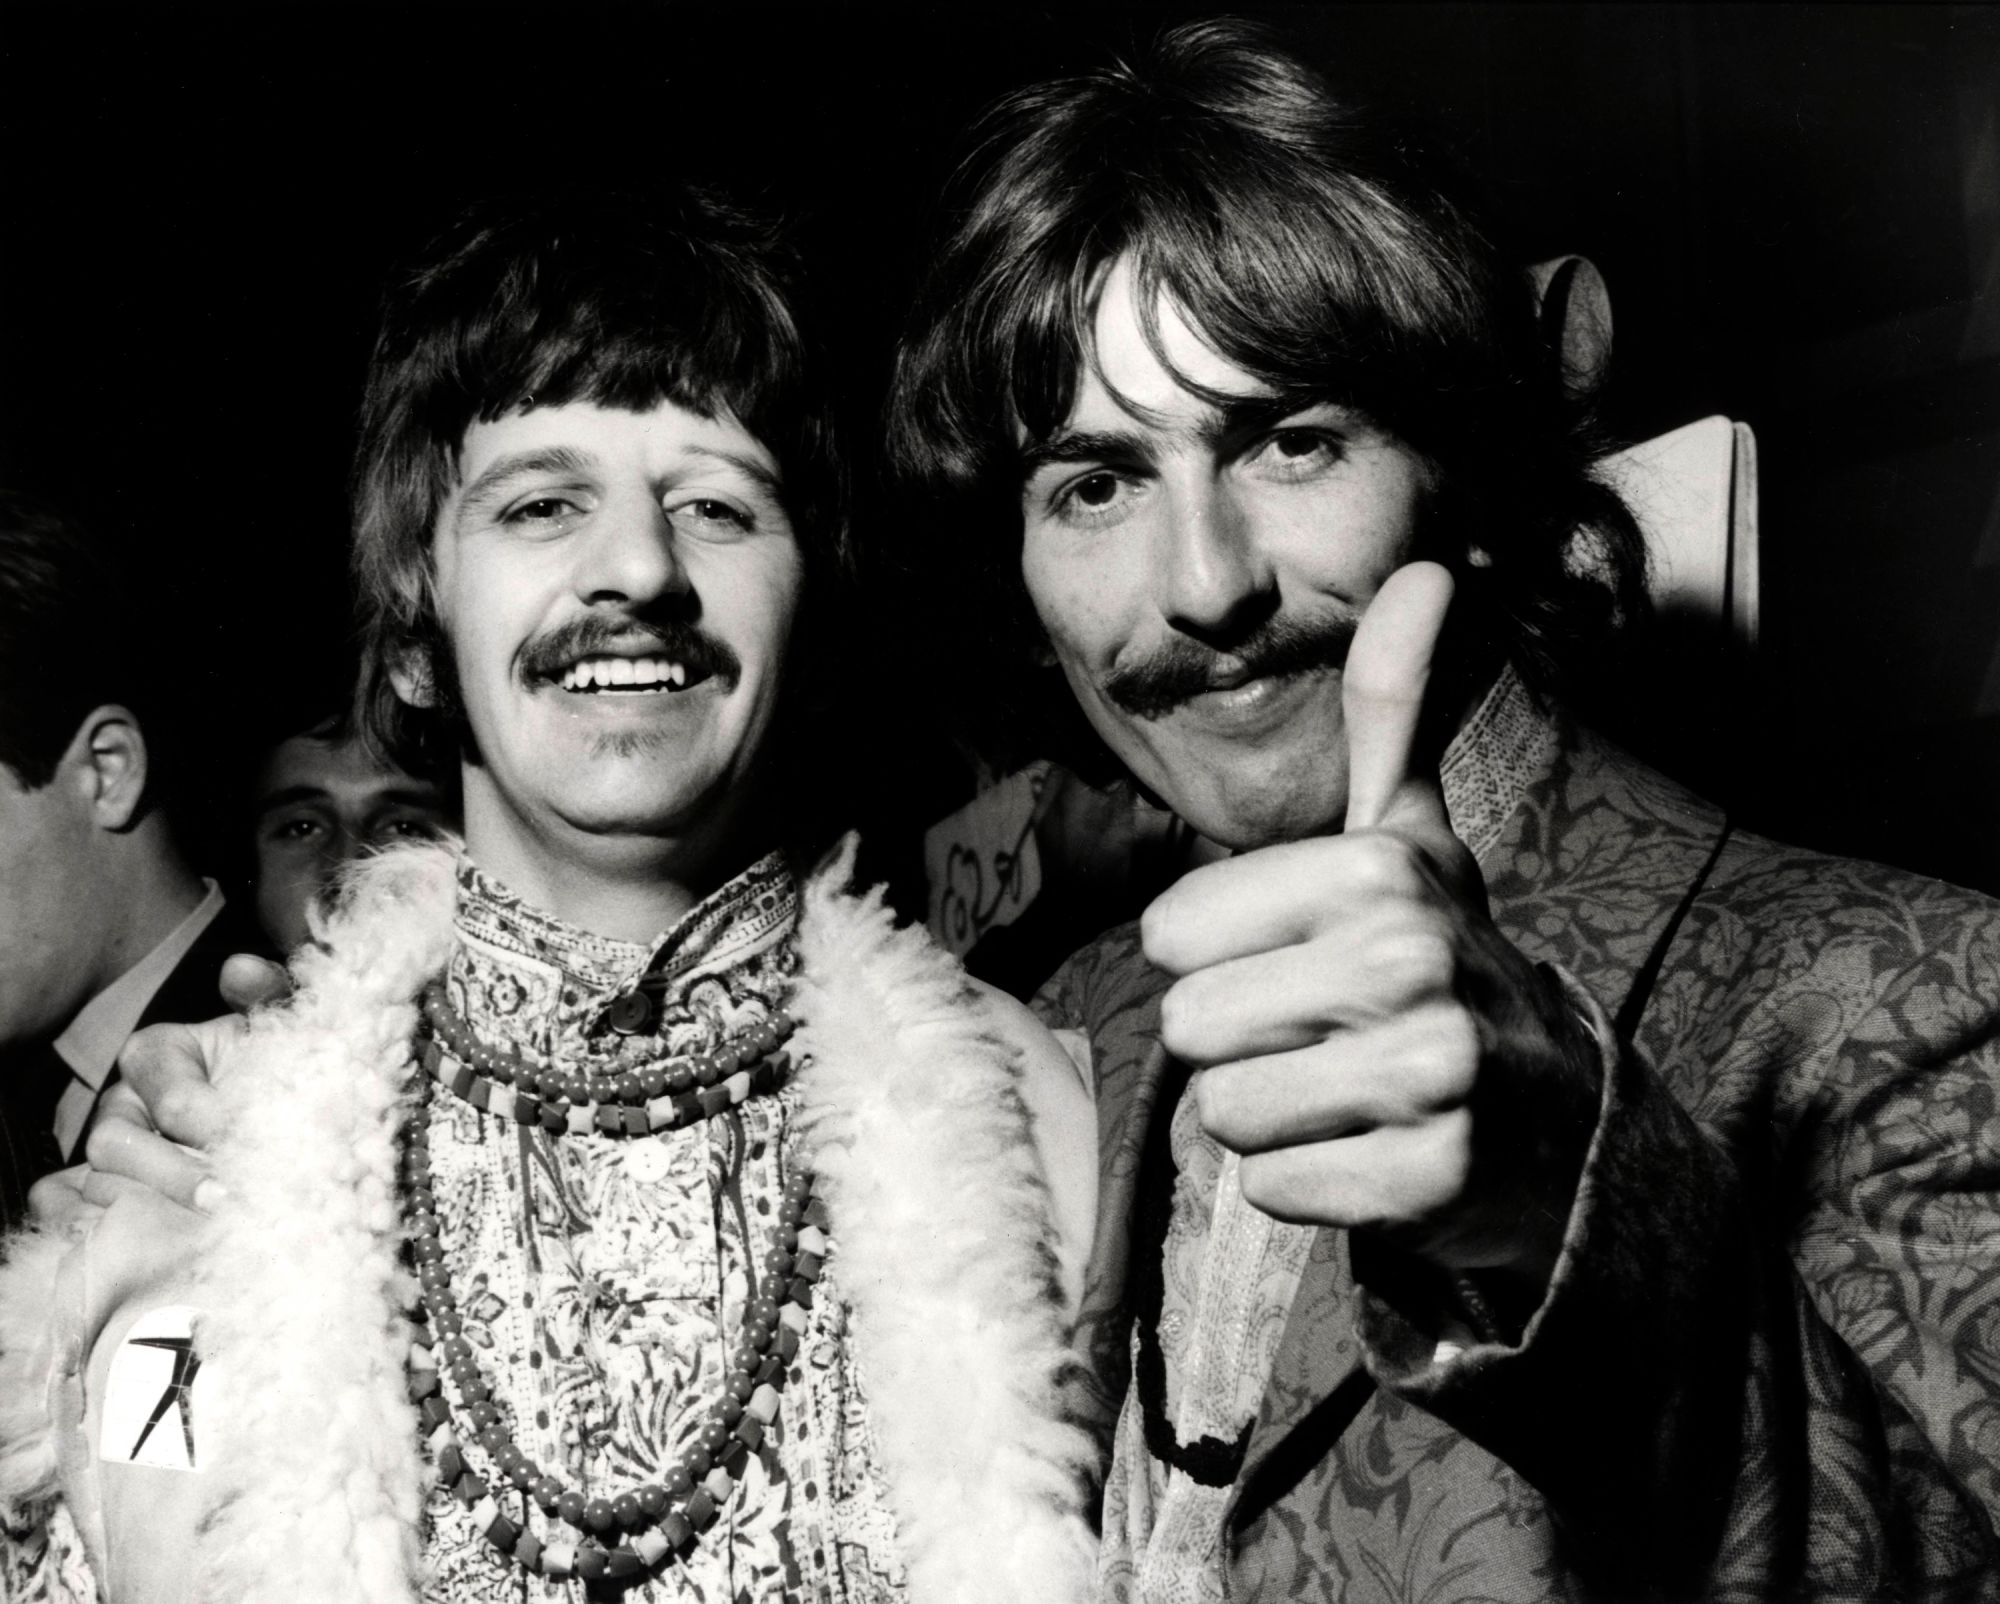 Lost 1968 song with Beatles' George Harrison and Ringo Starr heard